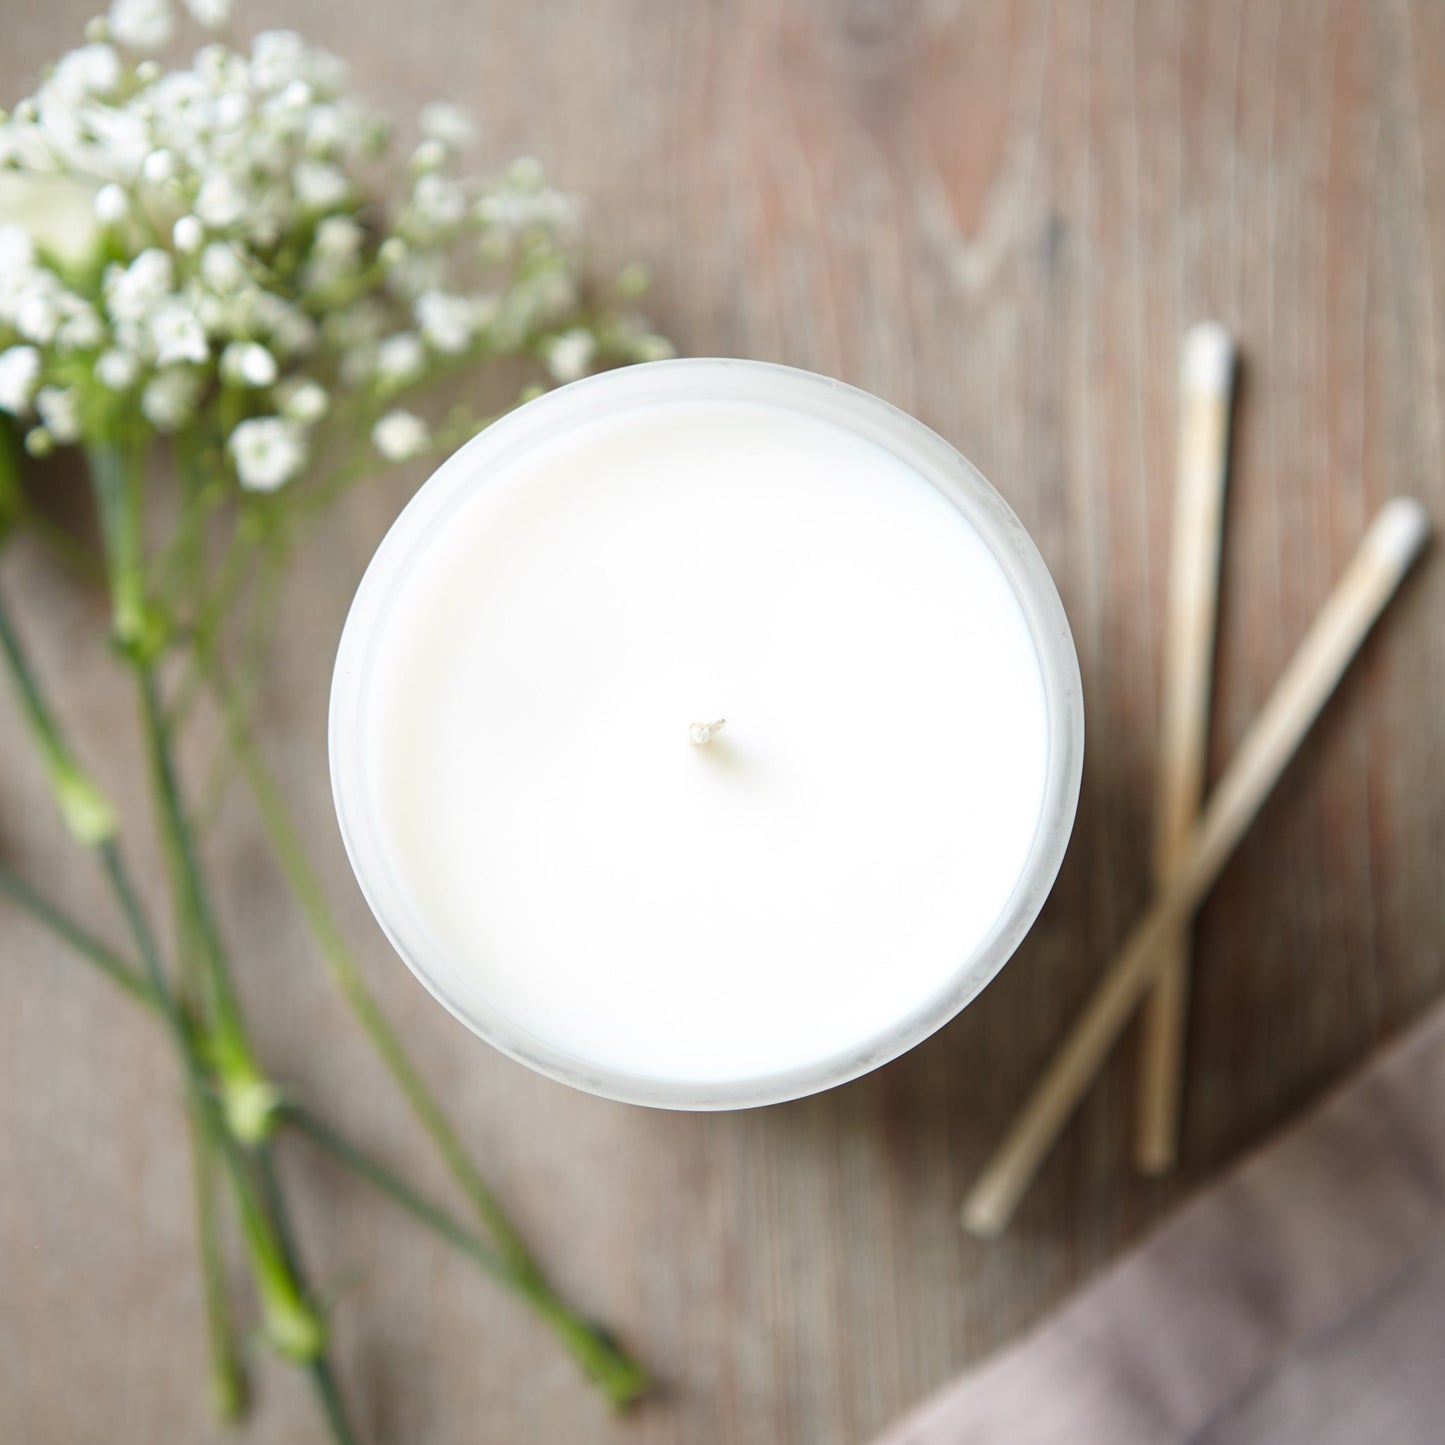 First Mother's Day Personalised Candle - Kindred Fires